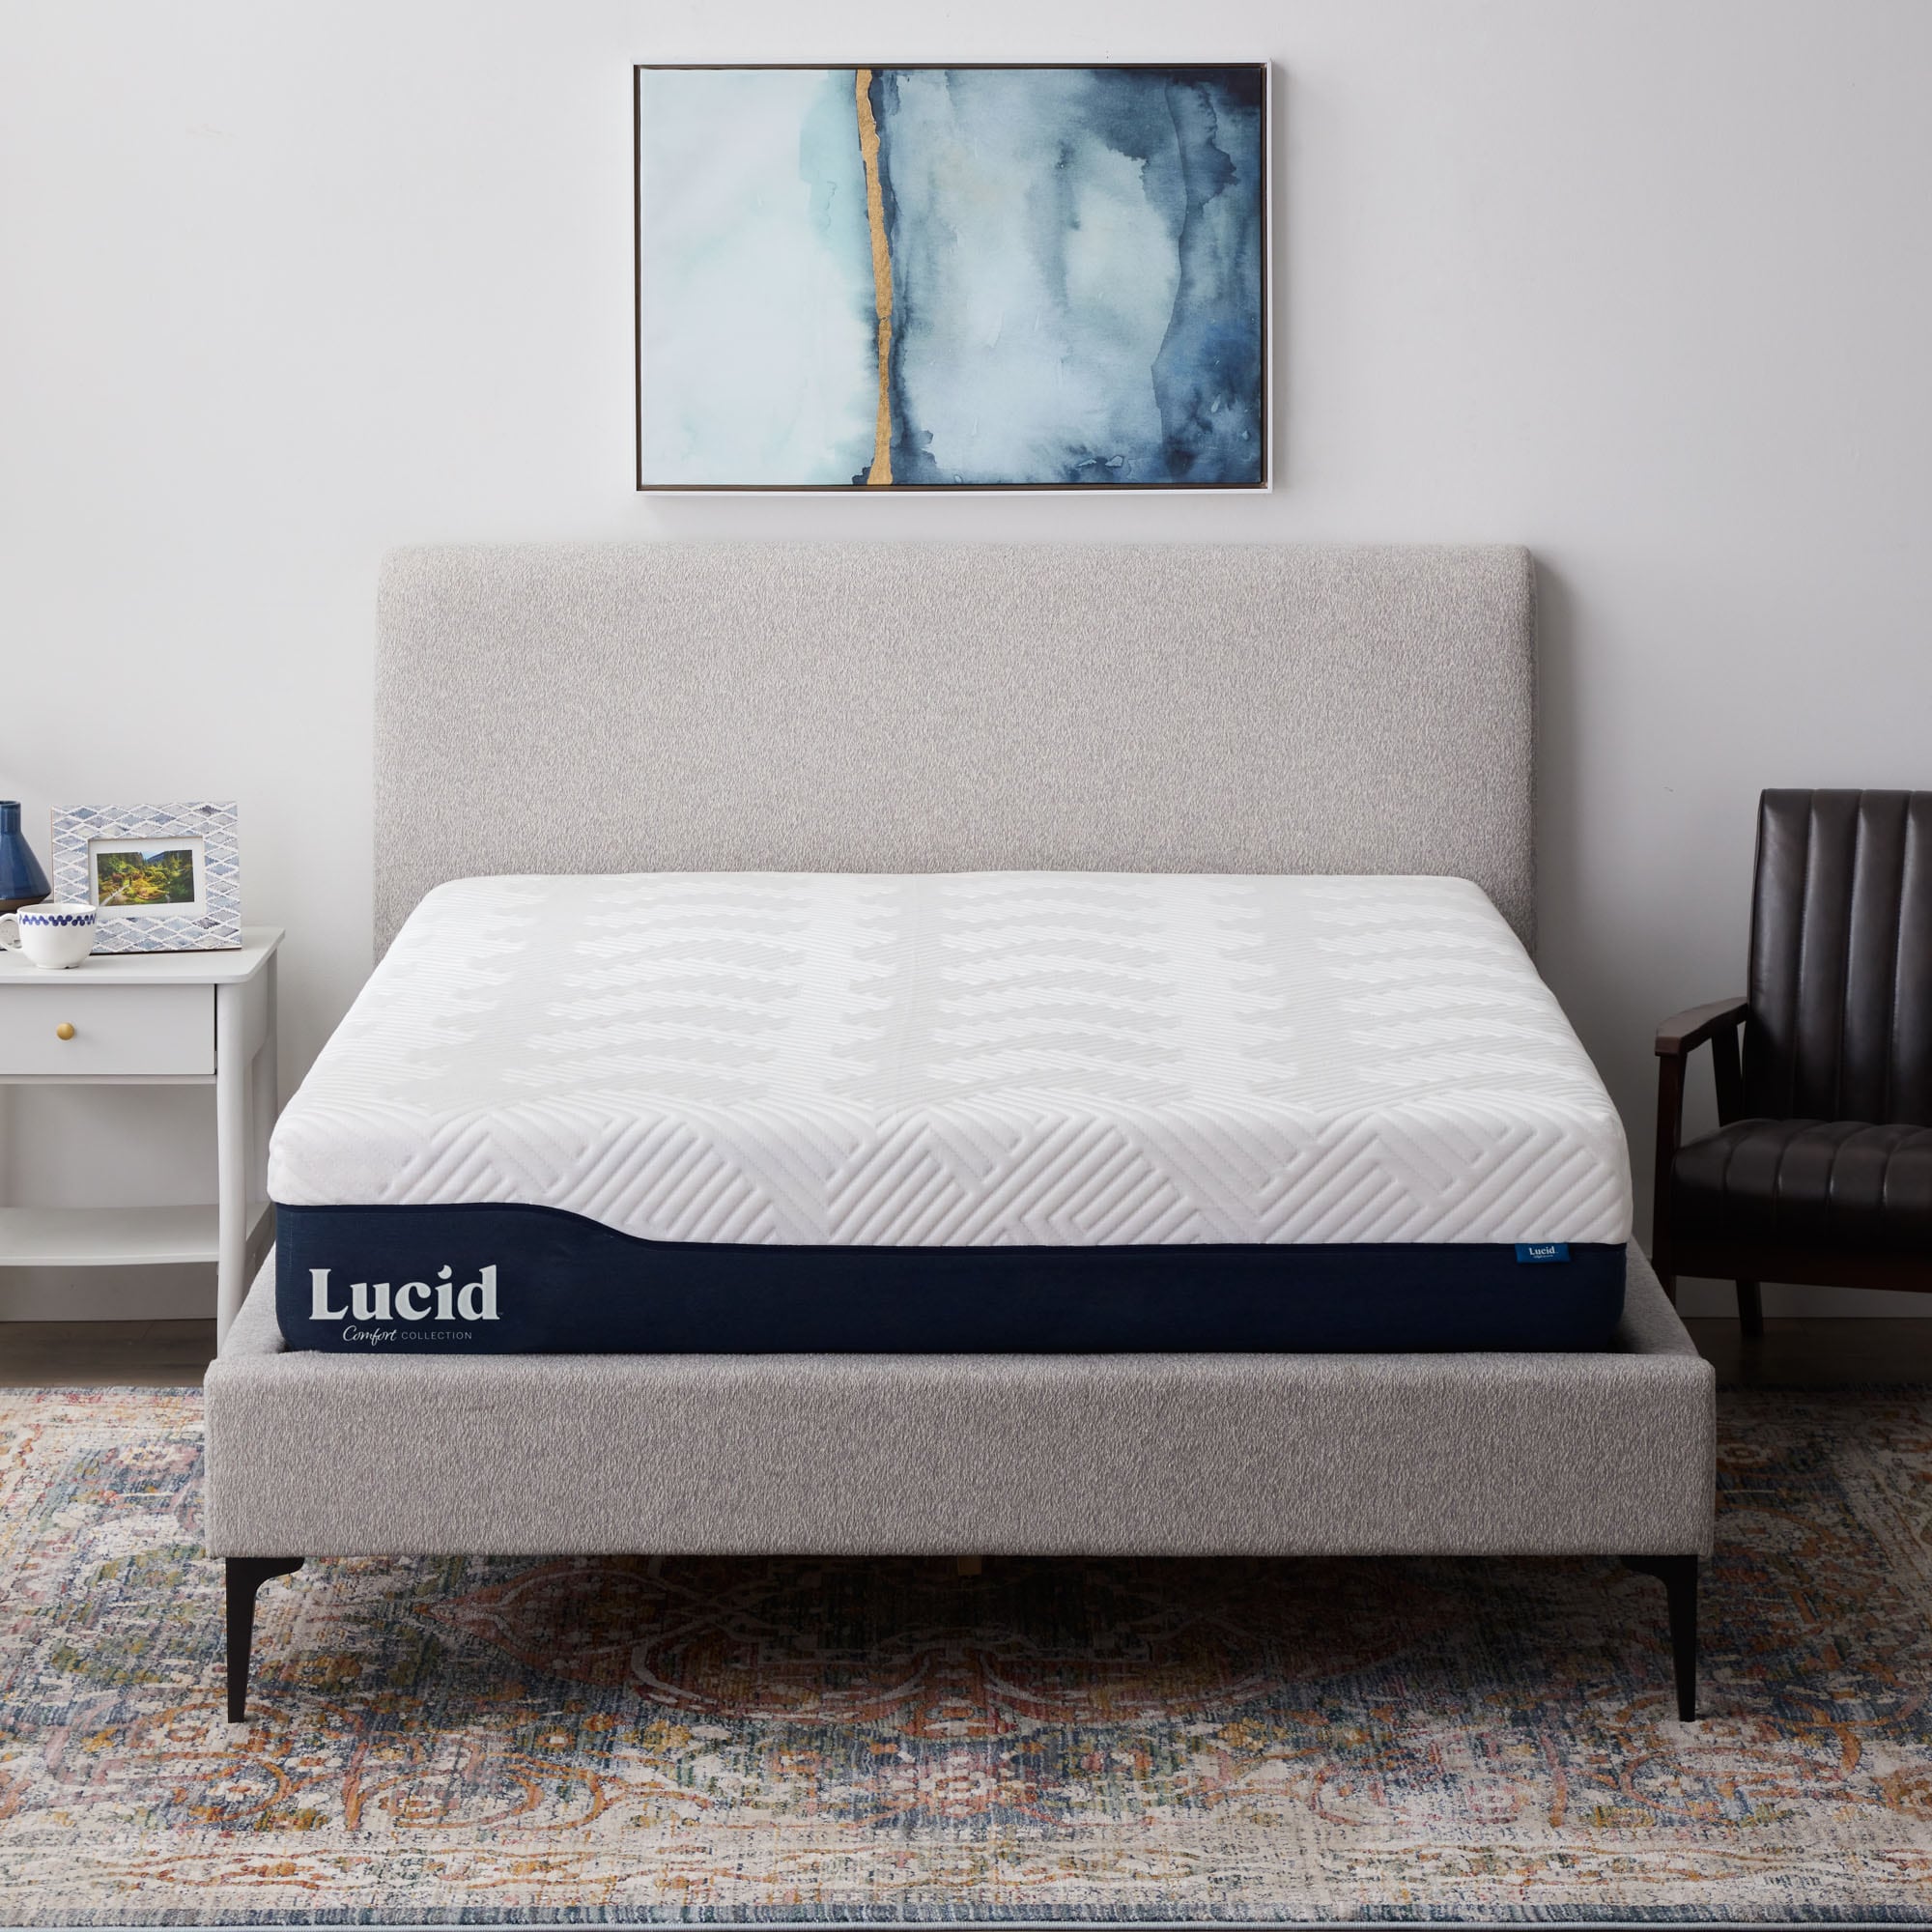 Gel and Aloe Vera 12-in Twin Hybrid Memory Foam/Coil Blend Mattress in a Box in White | - LUCID Comfort Collection LUCC12TT38GH